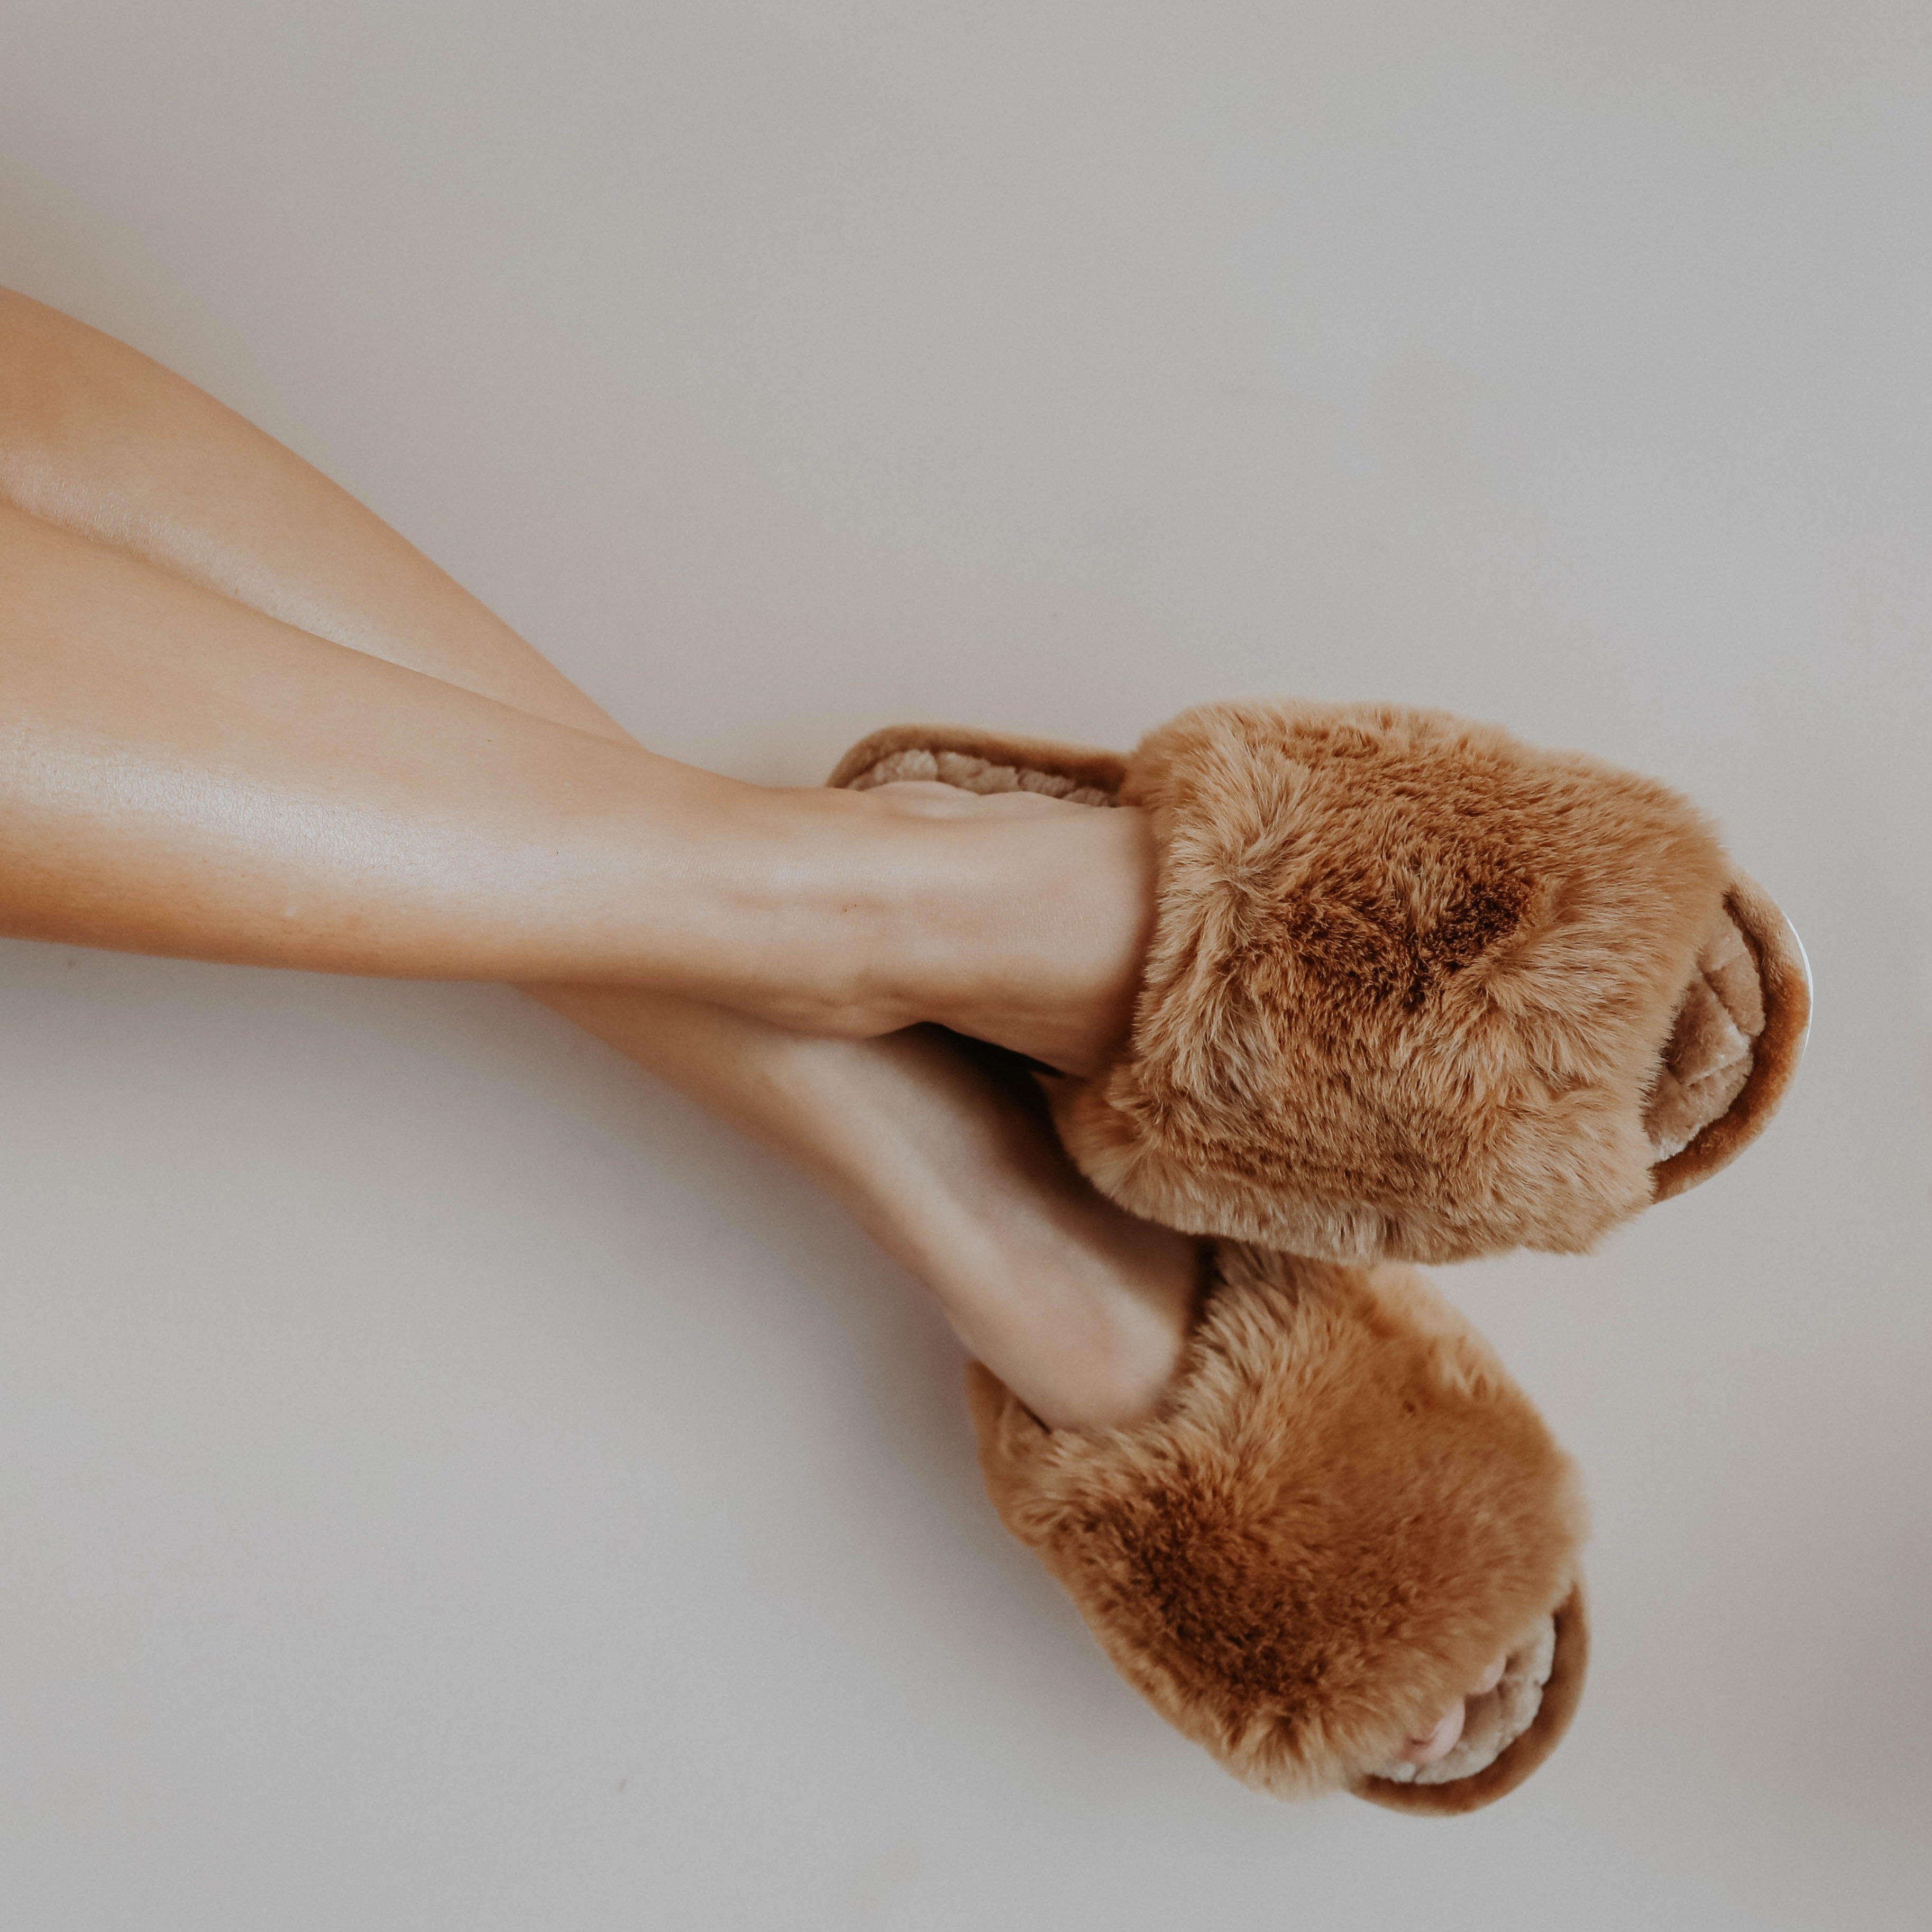 A girl crossing her legs wearing brown fuzzy slippers against a white background